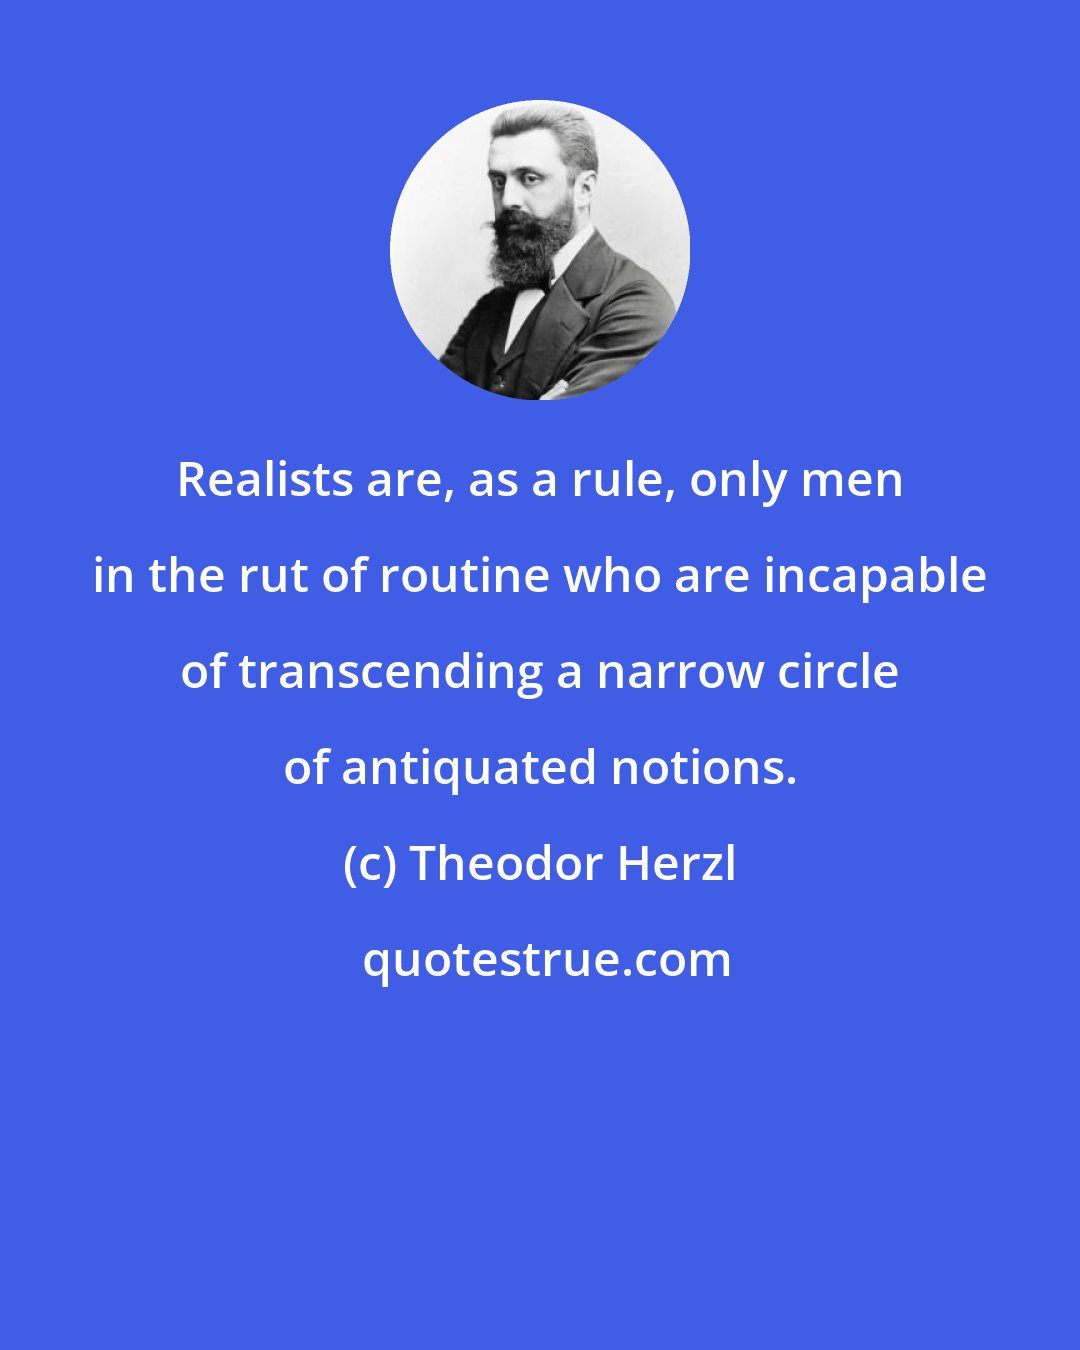 Theodor Herzl: Realists are, as a rule, only men in the rut of routine who are incapable of transcending a narrow circle of antiquated notions.